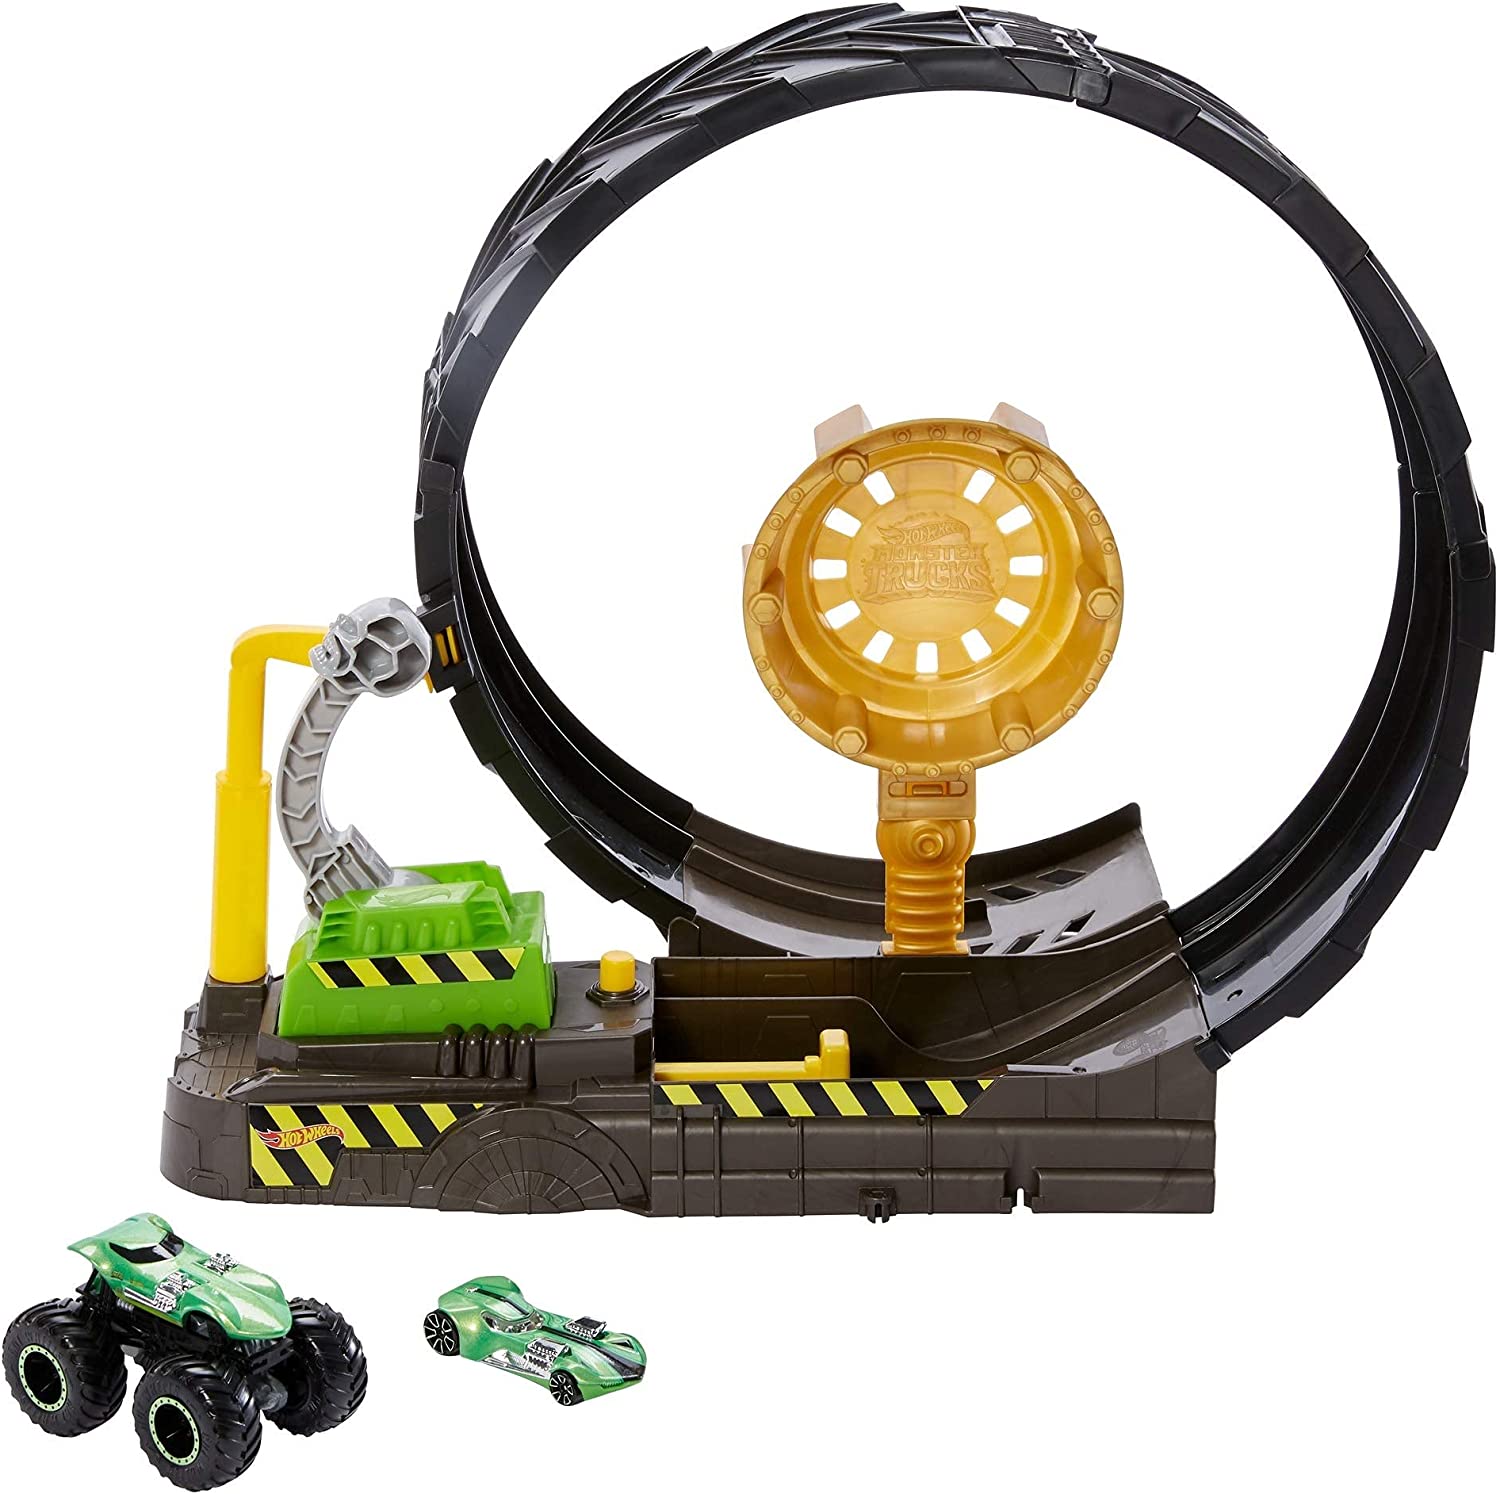 Hot Wheels Track Set And 1 1:64 Scale Toy Firetruck, City Dragon Drive  Firefight